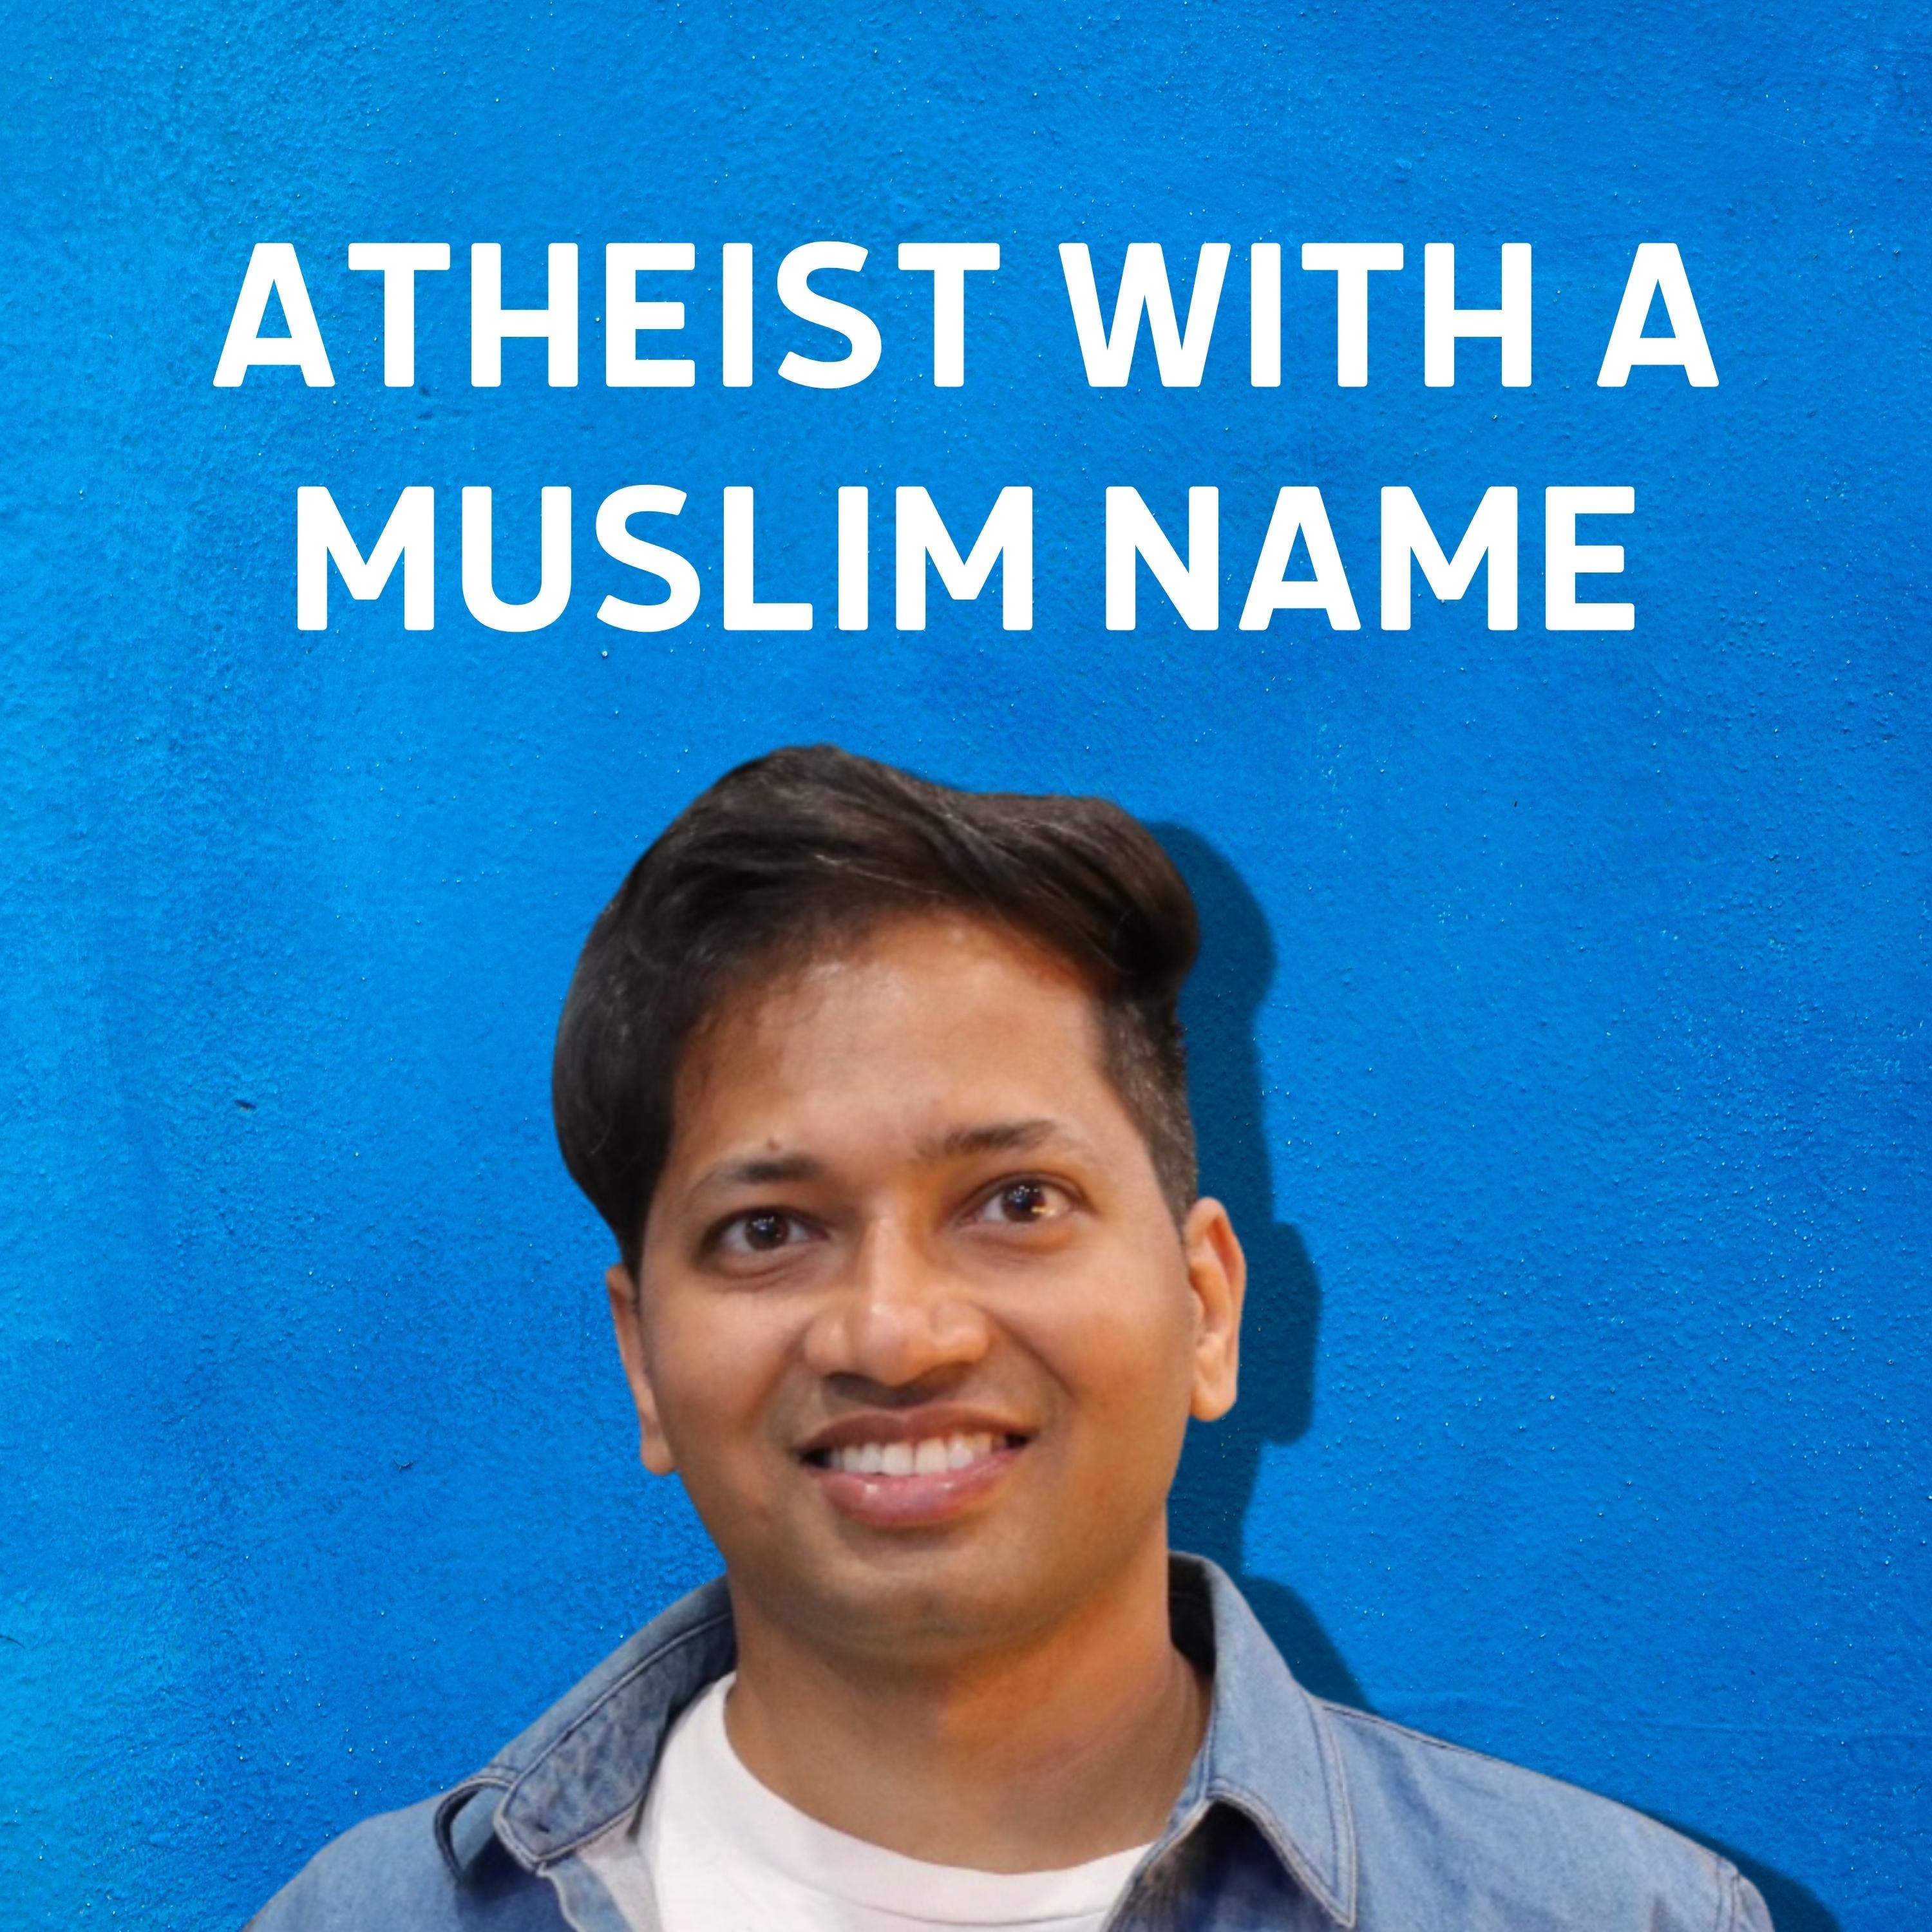 Shahbaz Ansar on resisting dogma and being an atheist